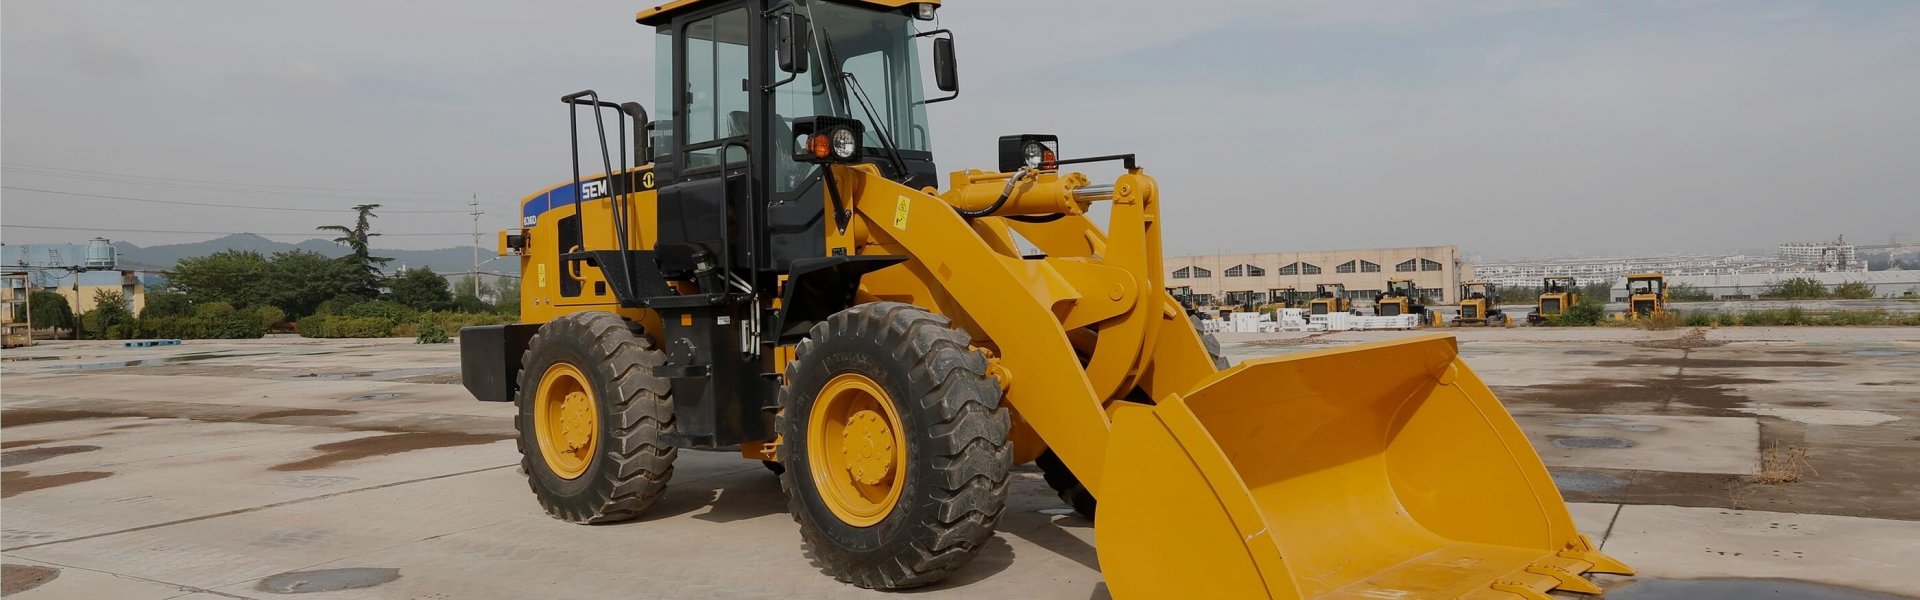 Used wheel loader for sale muscat